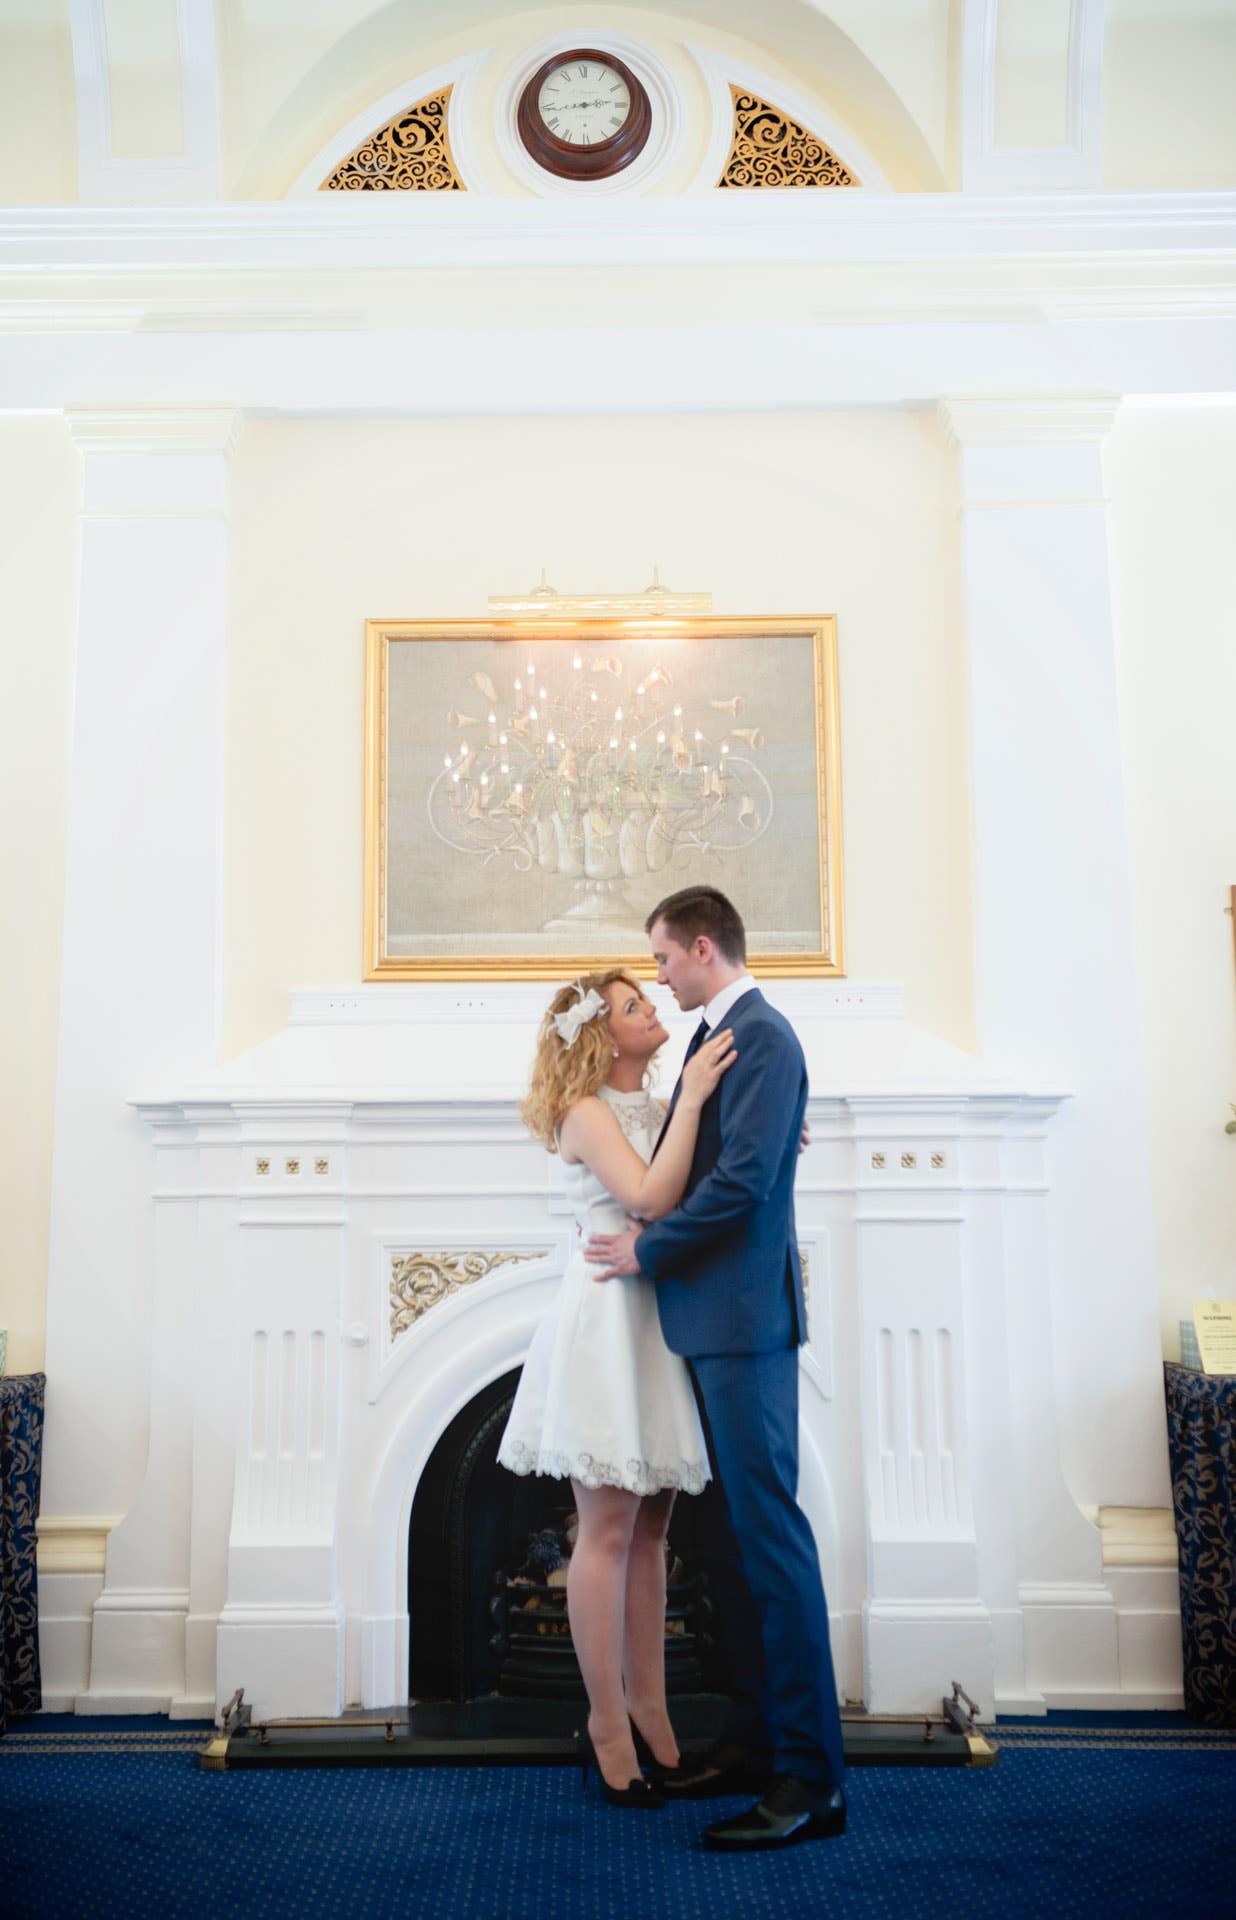 Bromley on Bow Registry office, London UK Wedding photography ceremony room wioth the guest